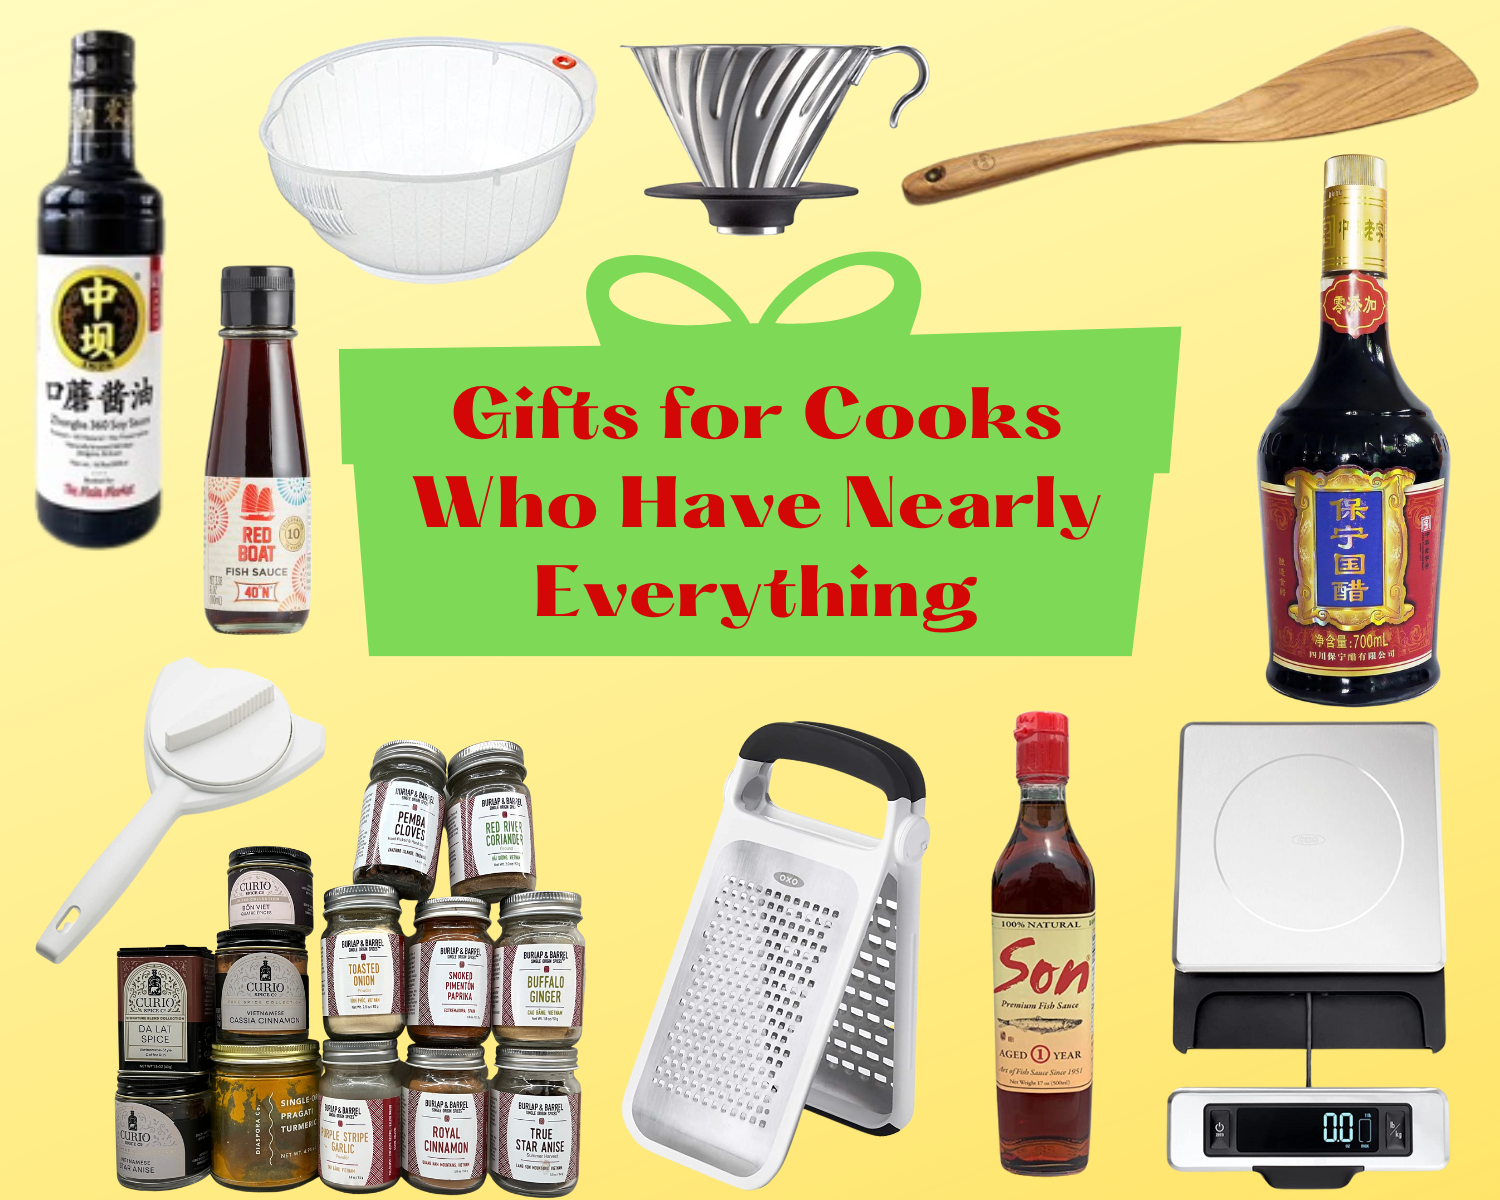 https://www.vietworldkitchen.com/wp-content/uploads/2022/12/Gifts-for-Cooks-wide-1.png